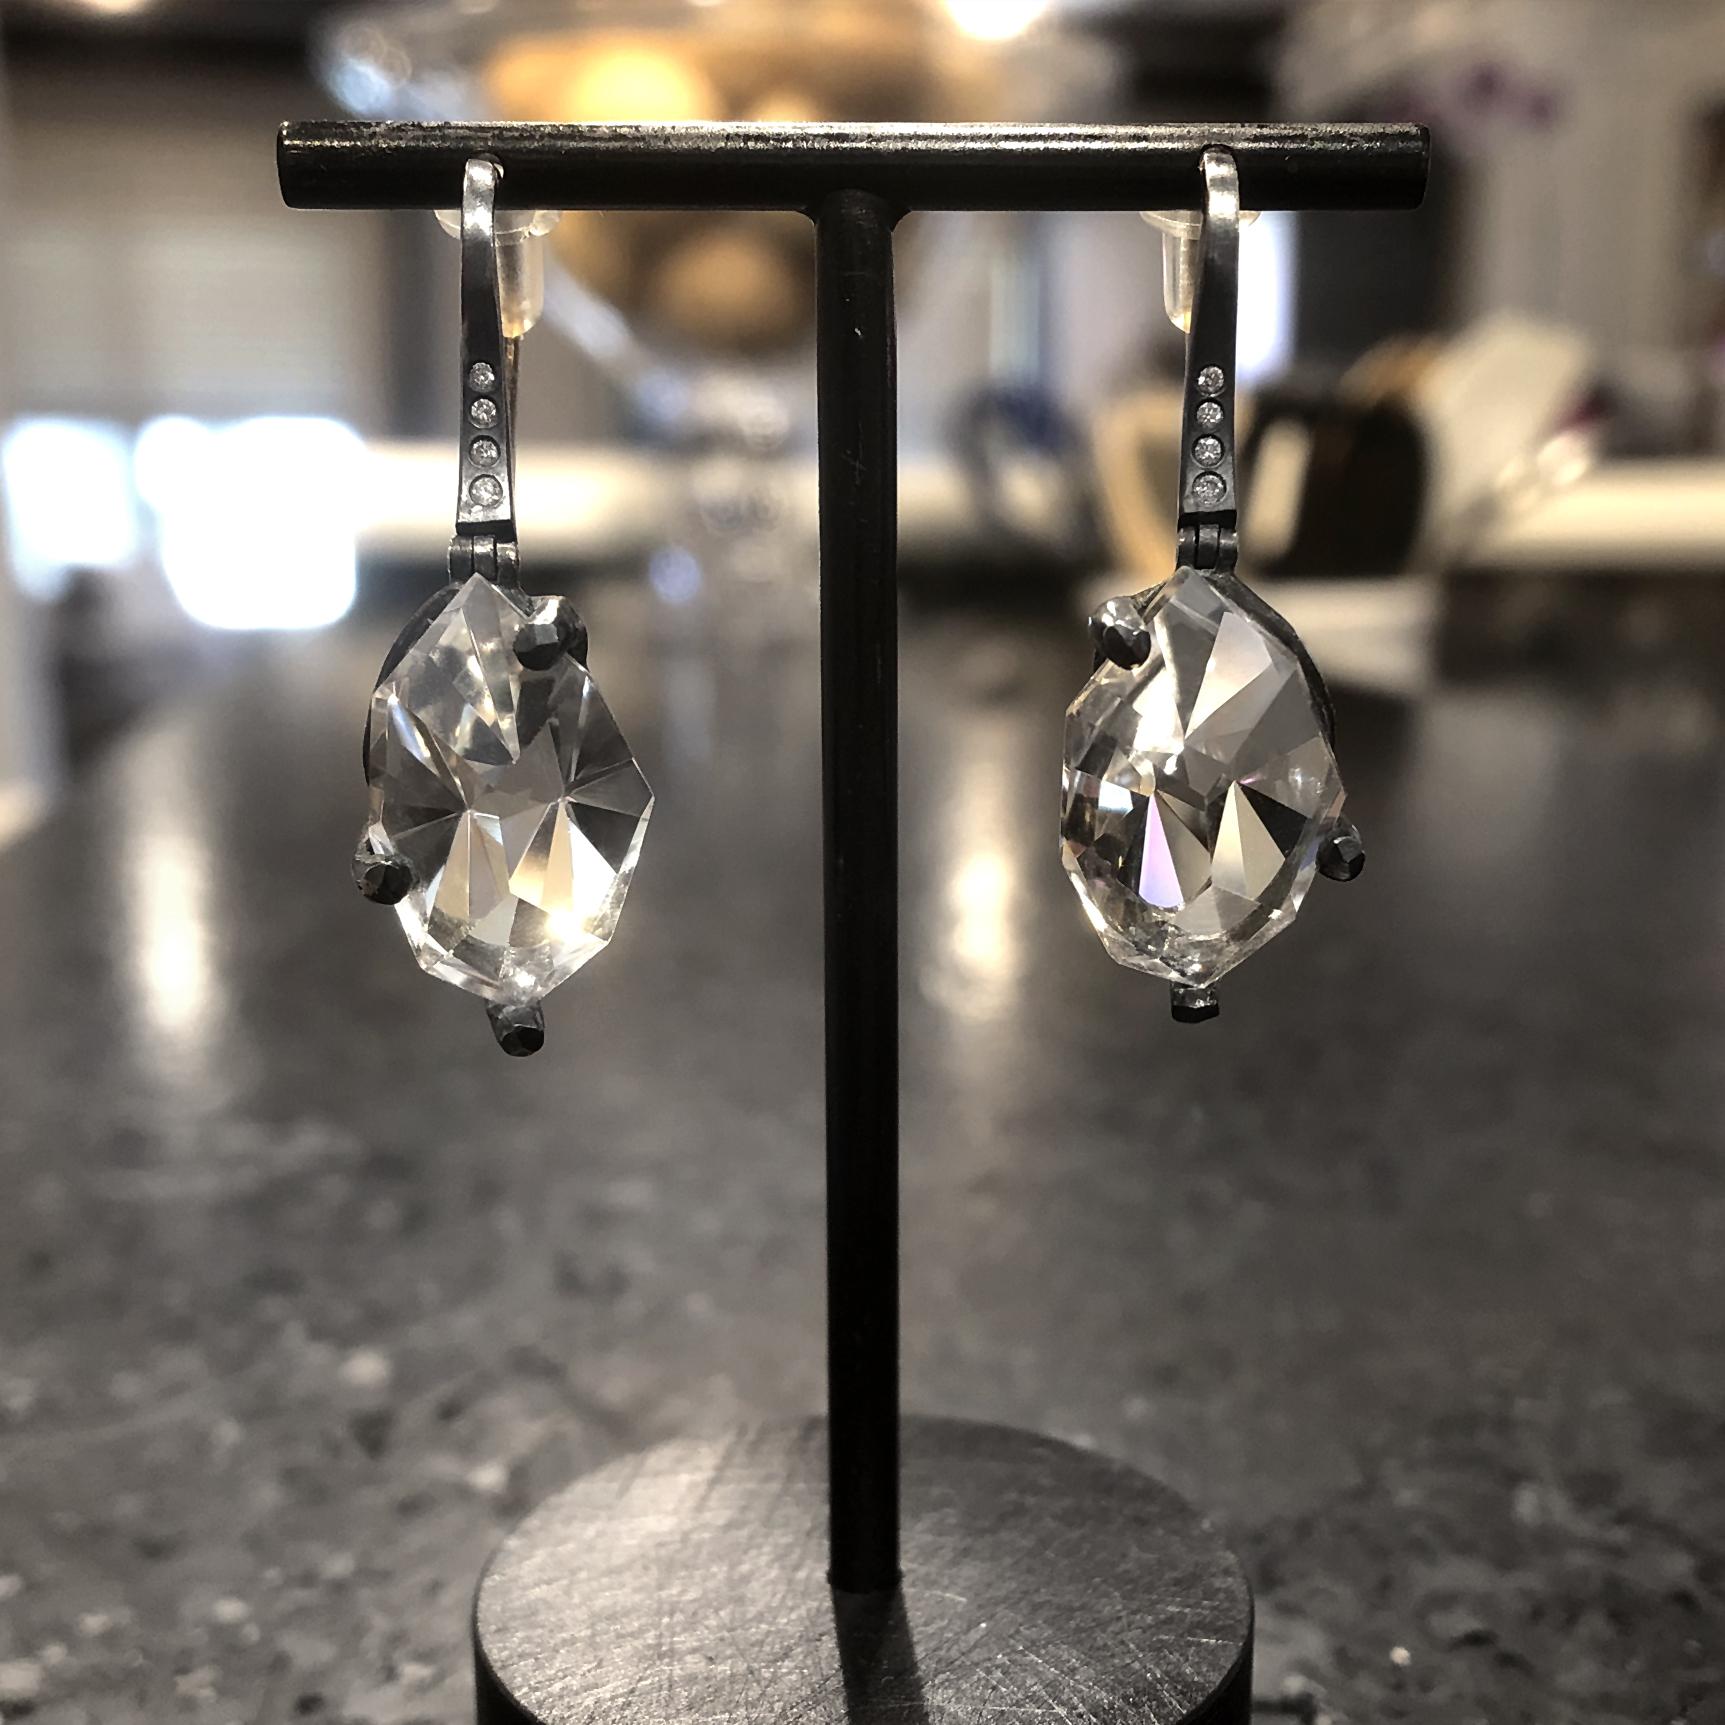 Prism Facet Drop Earrings hand-fabricated by jewelry maker Elizabeth Garvin in oxidized sterling silver (on 18k yellow gold ear wires) featuring a matched pair of custom-cut and faceted prismatic rock crystal gems totaling 15.35 carats and accented